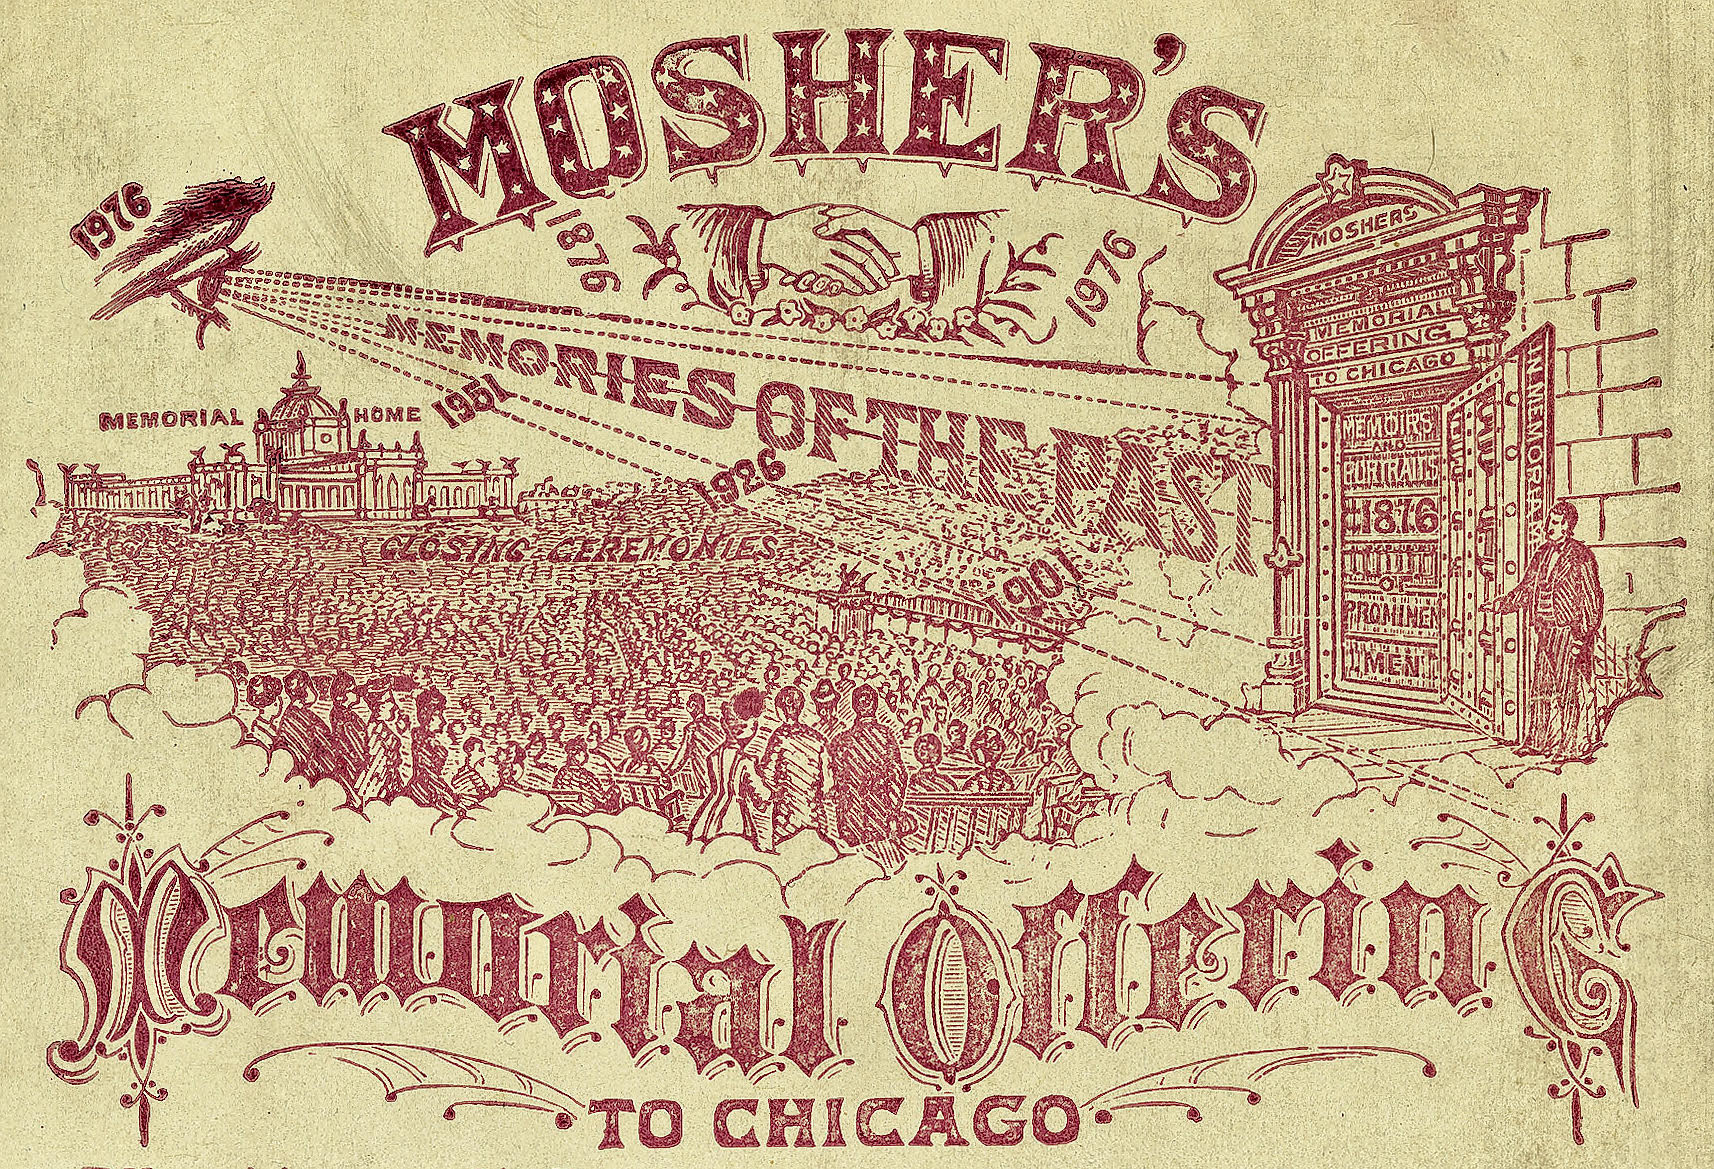 “Mosher’s Memorial Offering to Chicago.” Detail from backmark of a Charles D. Mosher’s memorial photograph.